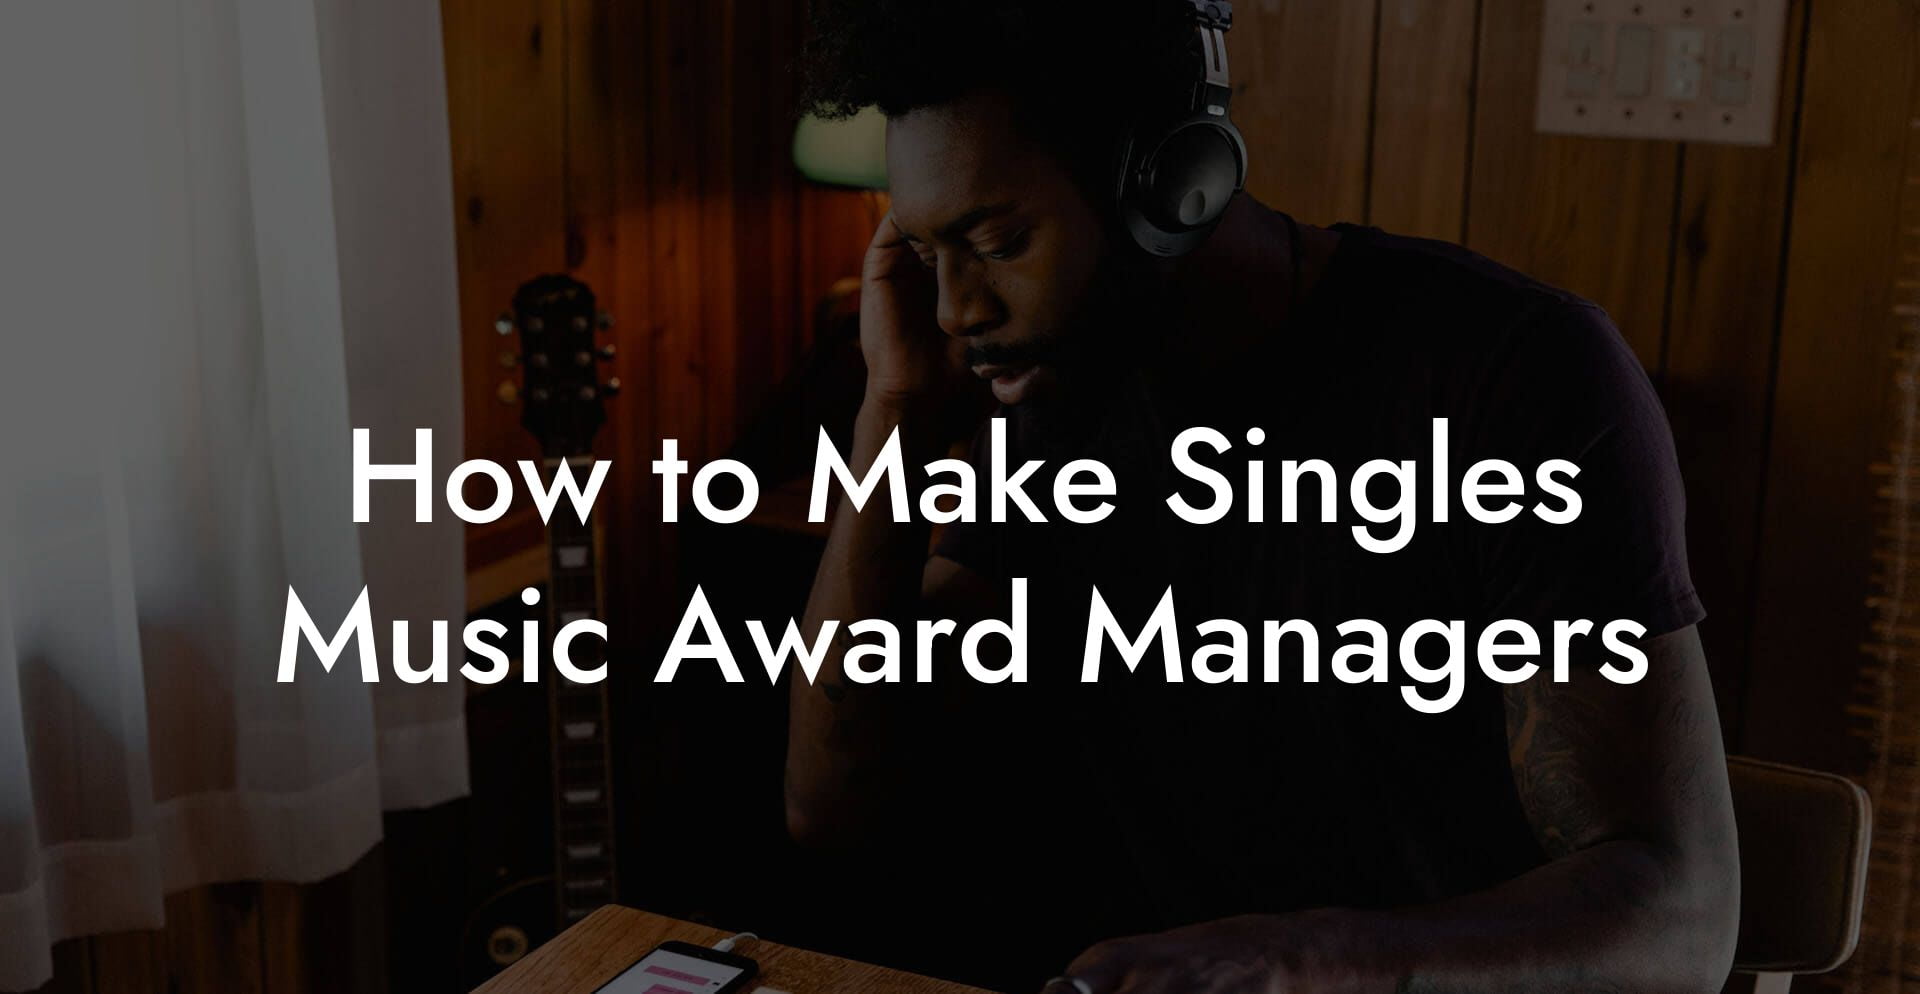 How to Make Singles Music Award Managers